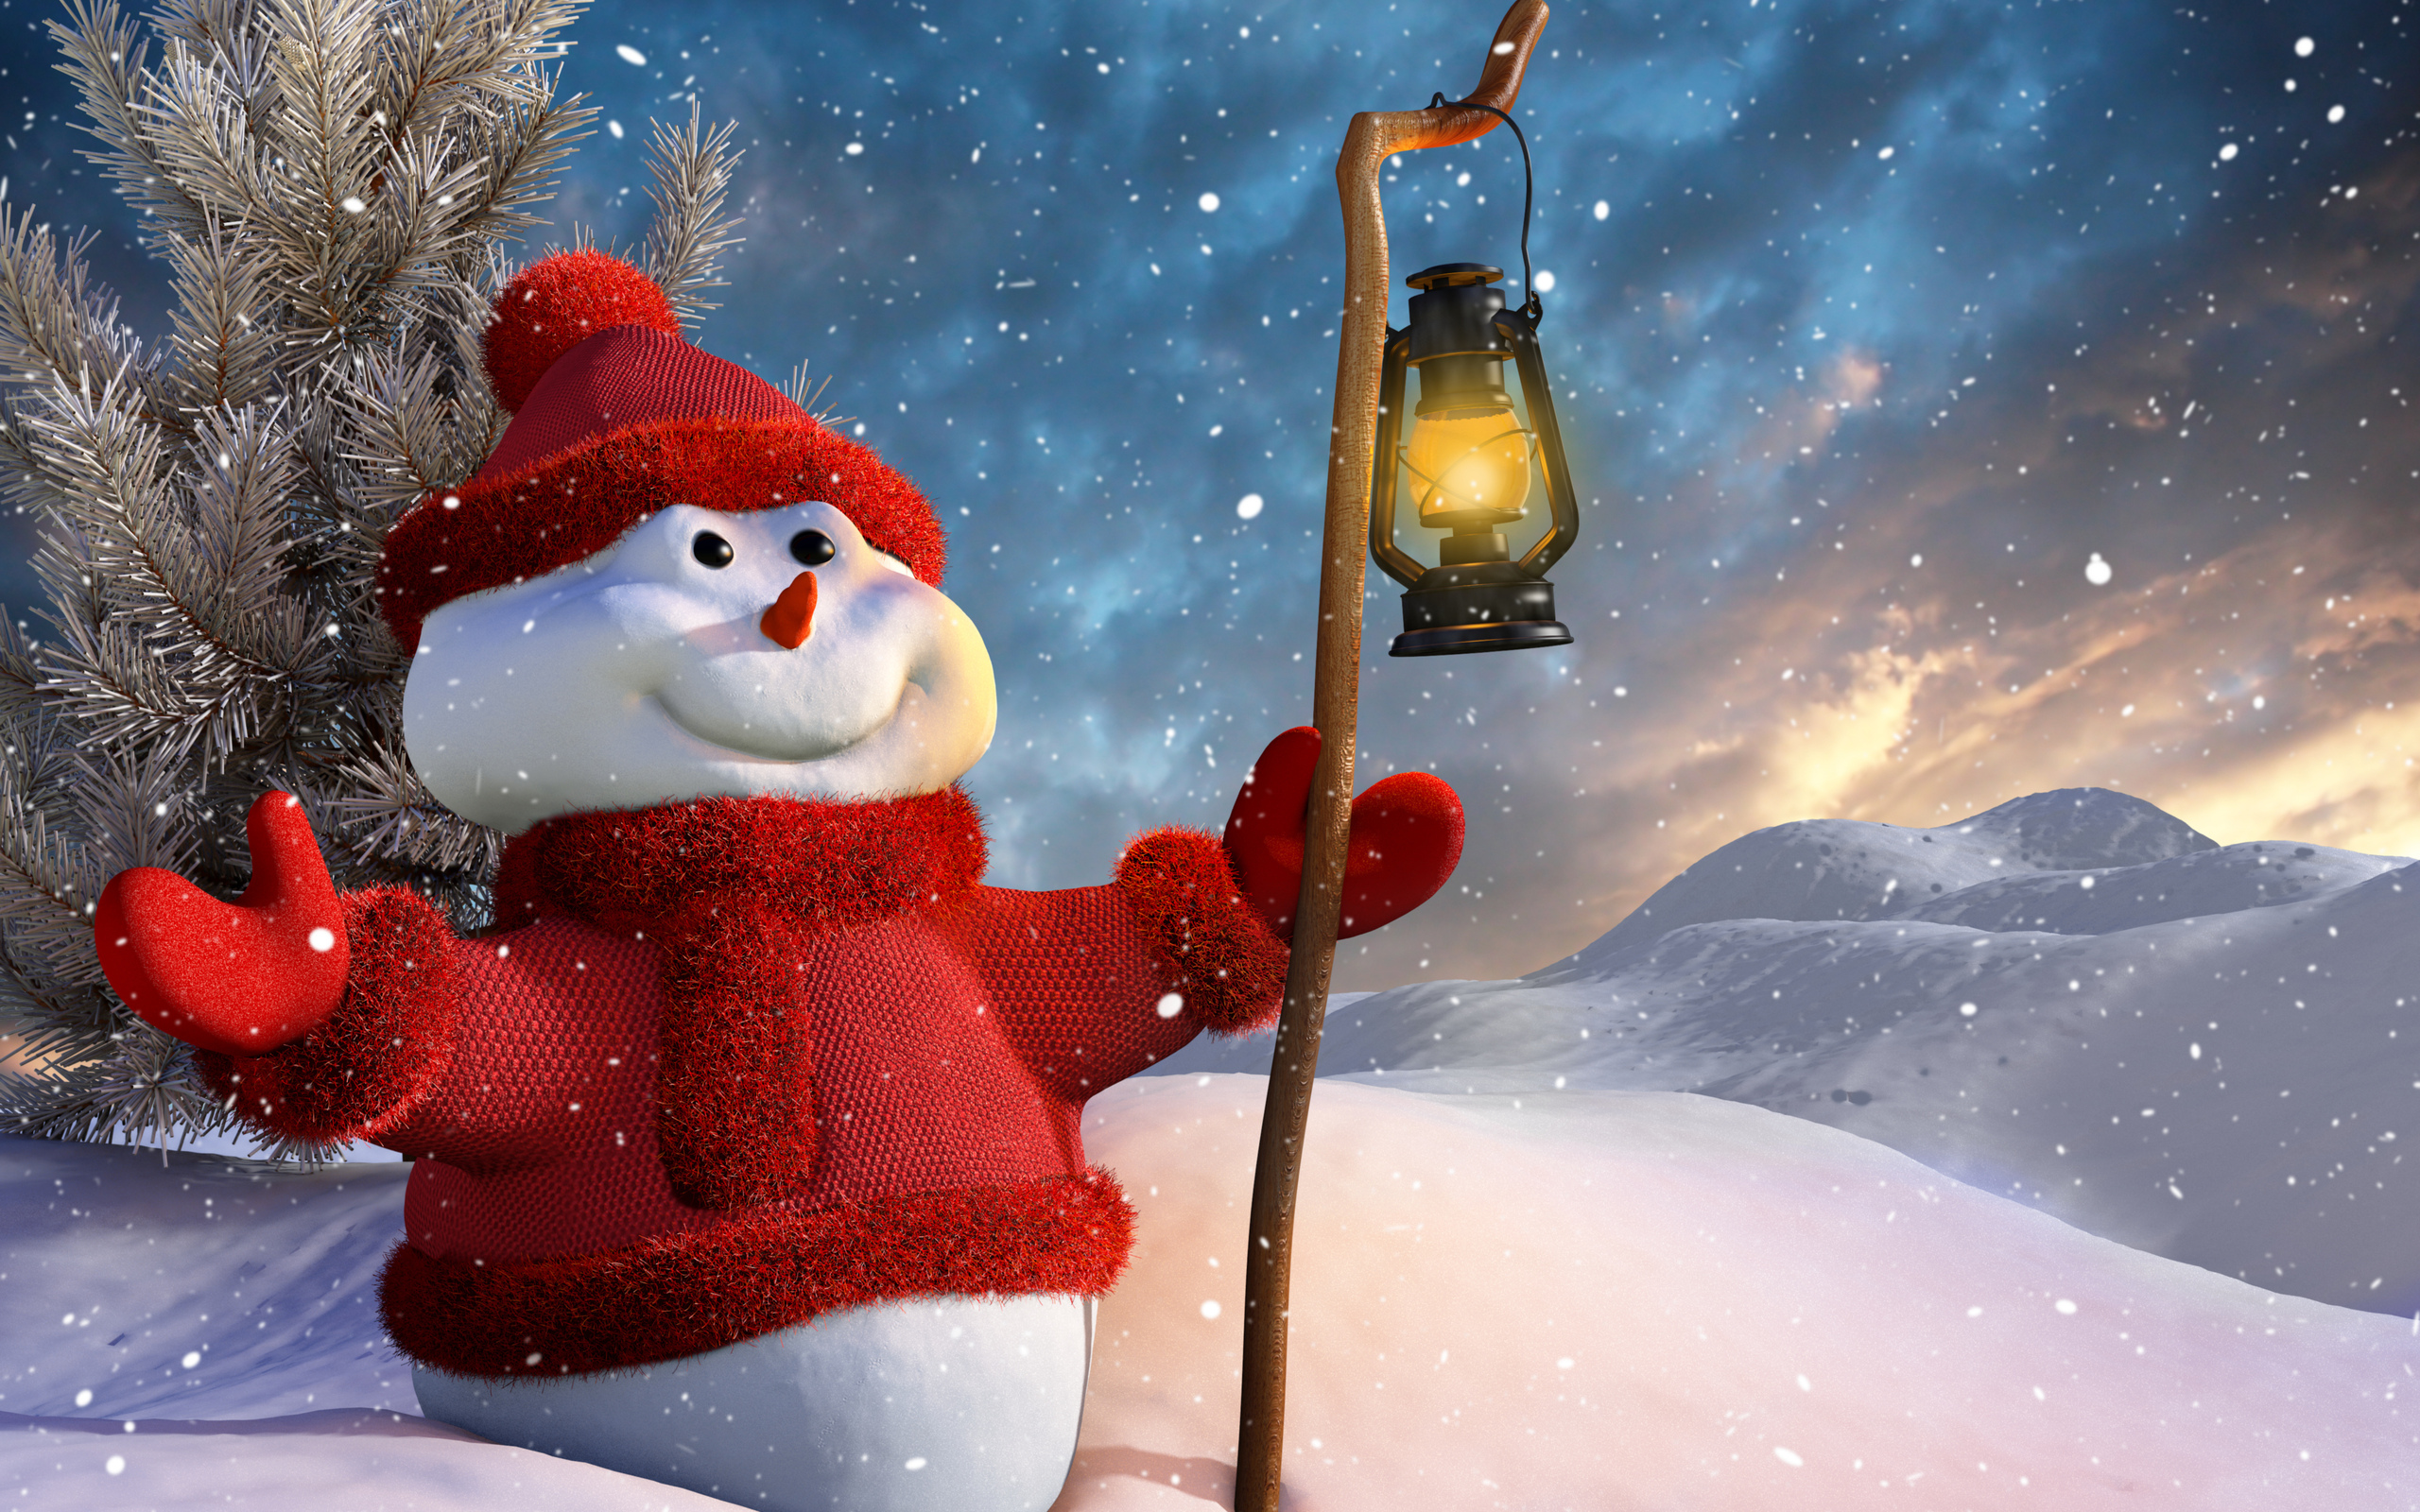 Wallpapers snowman red cap red jacket on the desktop